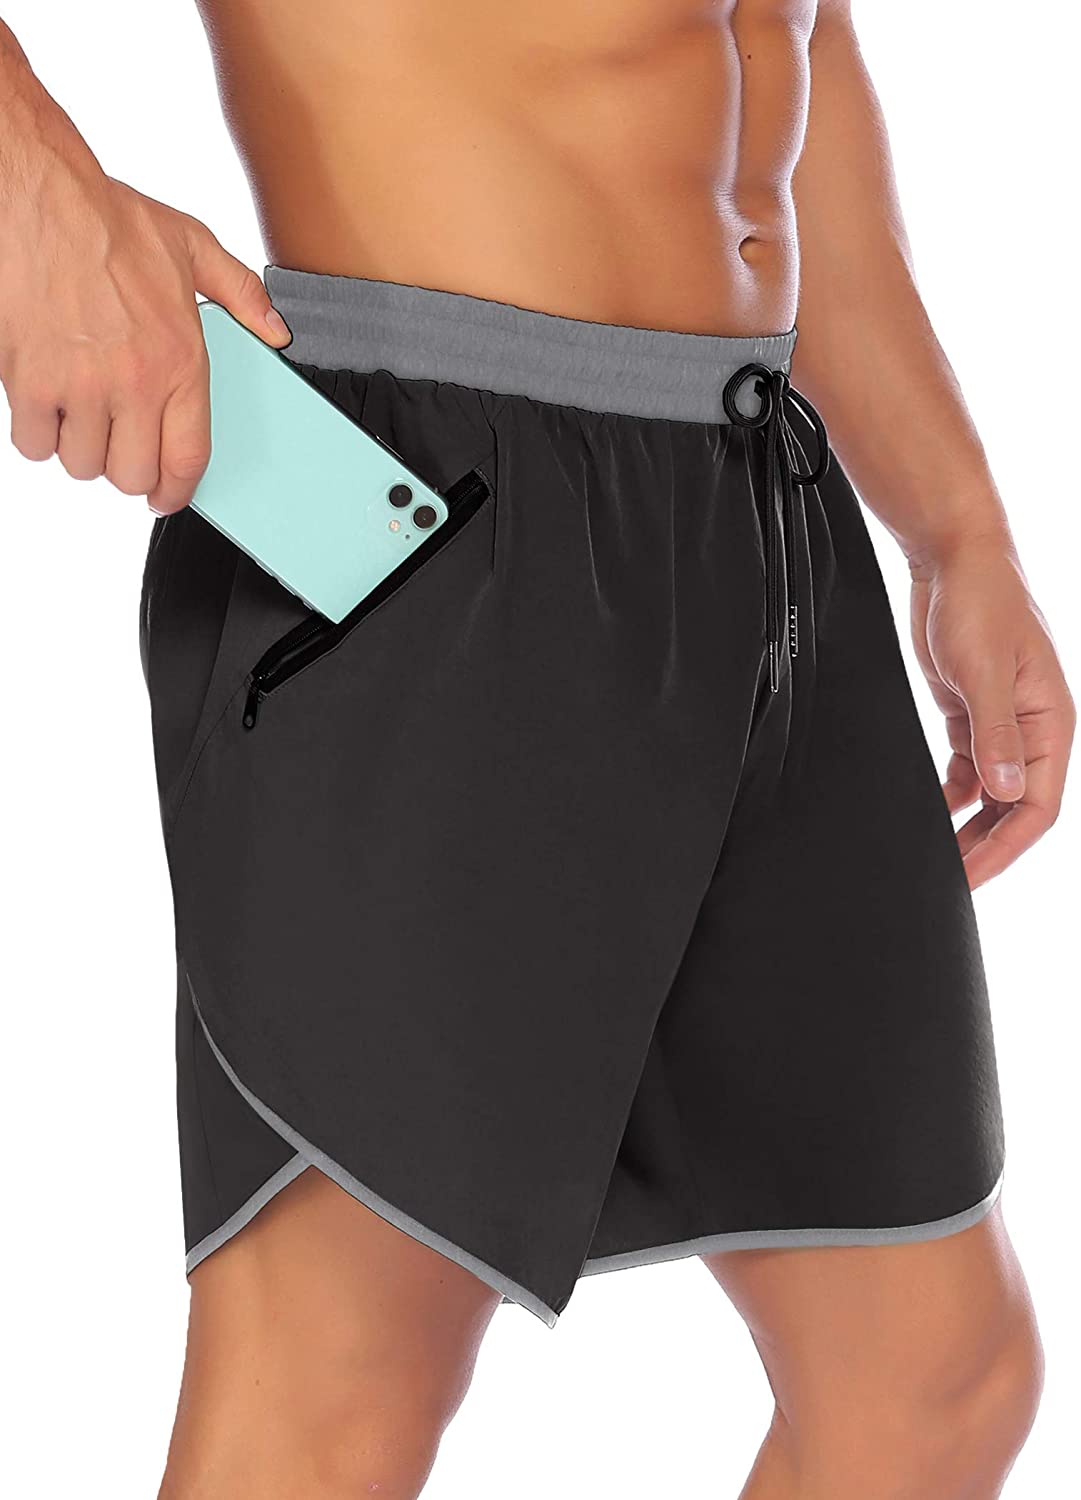 MAGNIVIT Mens Quick Dry Running Shorts with Zipper Pockets Athletic Workout Gym Training Shorts